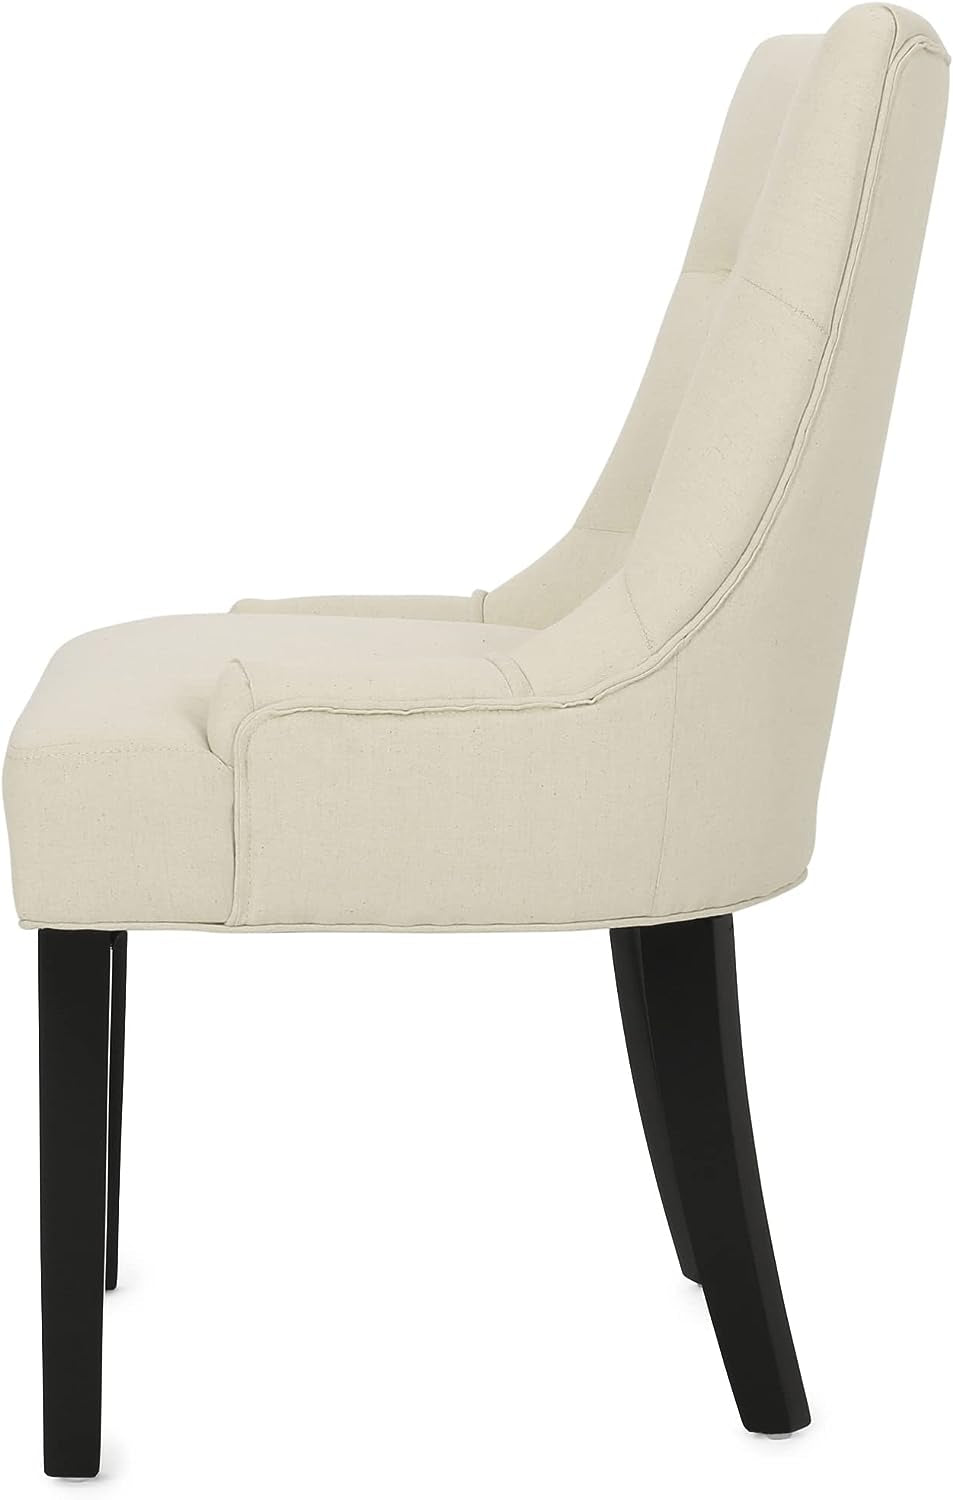 Hayden Tufted Fabric Dining / Accent Chairs, 2-Pcs Set, Beige